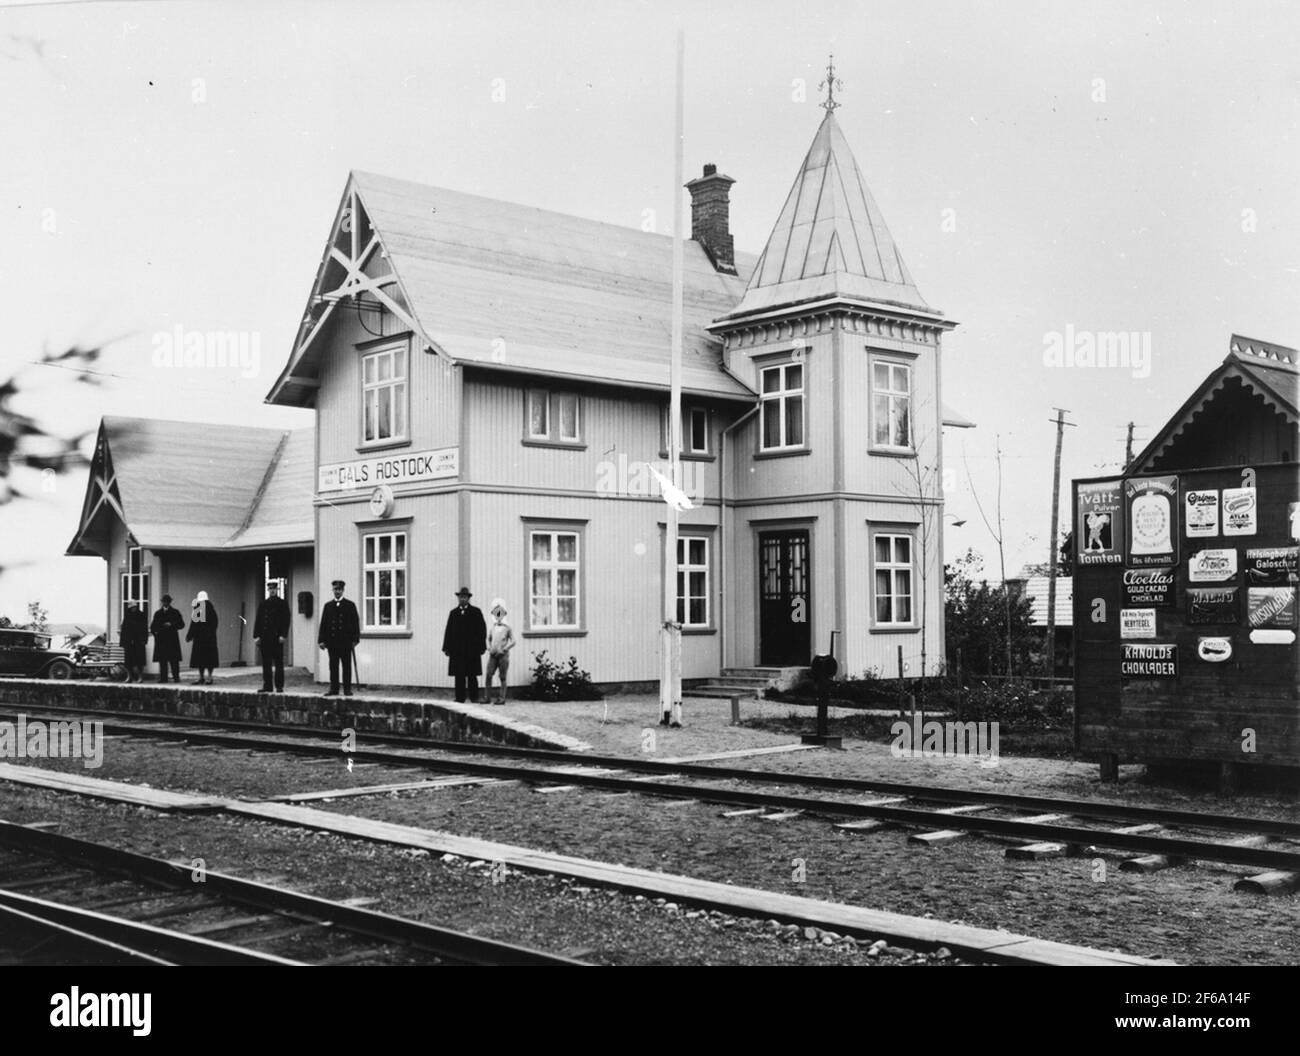 Railway station in Dals-Rostock. The side building on the left was used at the original stop in Rostock, landscaped in 1884, and was originally located above Rostock's well. Later, the building was transported down to the place where Dals-Rostock railway station was built in 1908, and was then built out to station houses. In 1941, the station house and replaced with a new one. Today is available in Dals-Rostock a model in scale 1: 2 of the original station house.Reclam: Lagermans washing plot; Malmö Large Walsqvarn; Gripen Velocipeder; Atlas rubber rings; Puch motorcycles; Cloetta's gold cacao Stock Photo